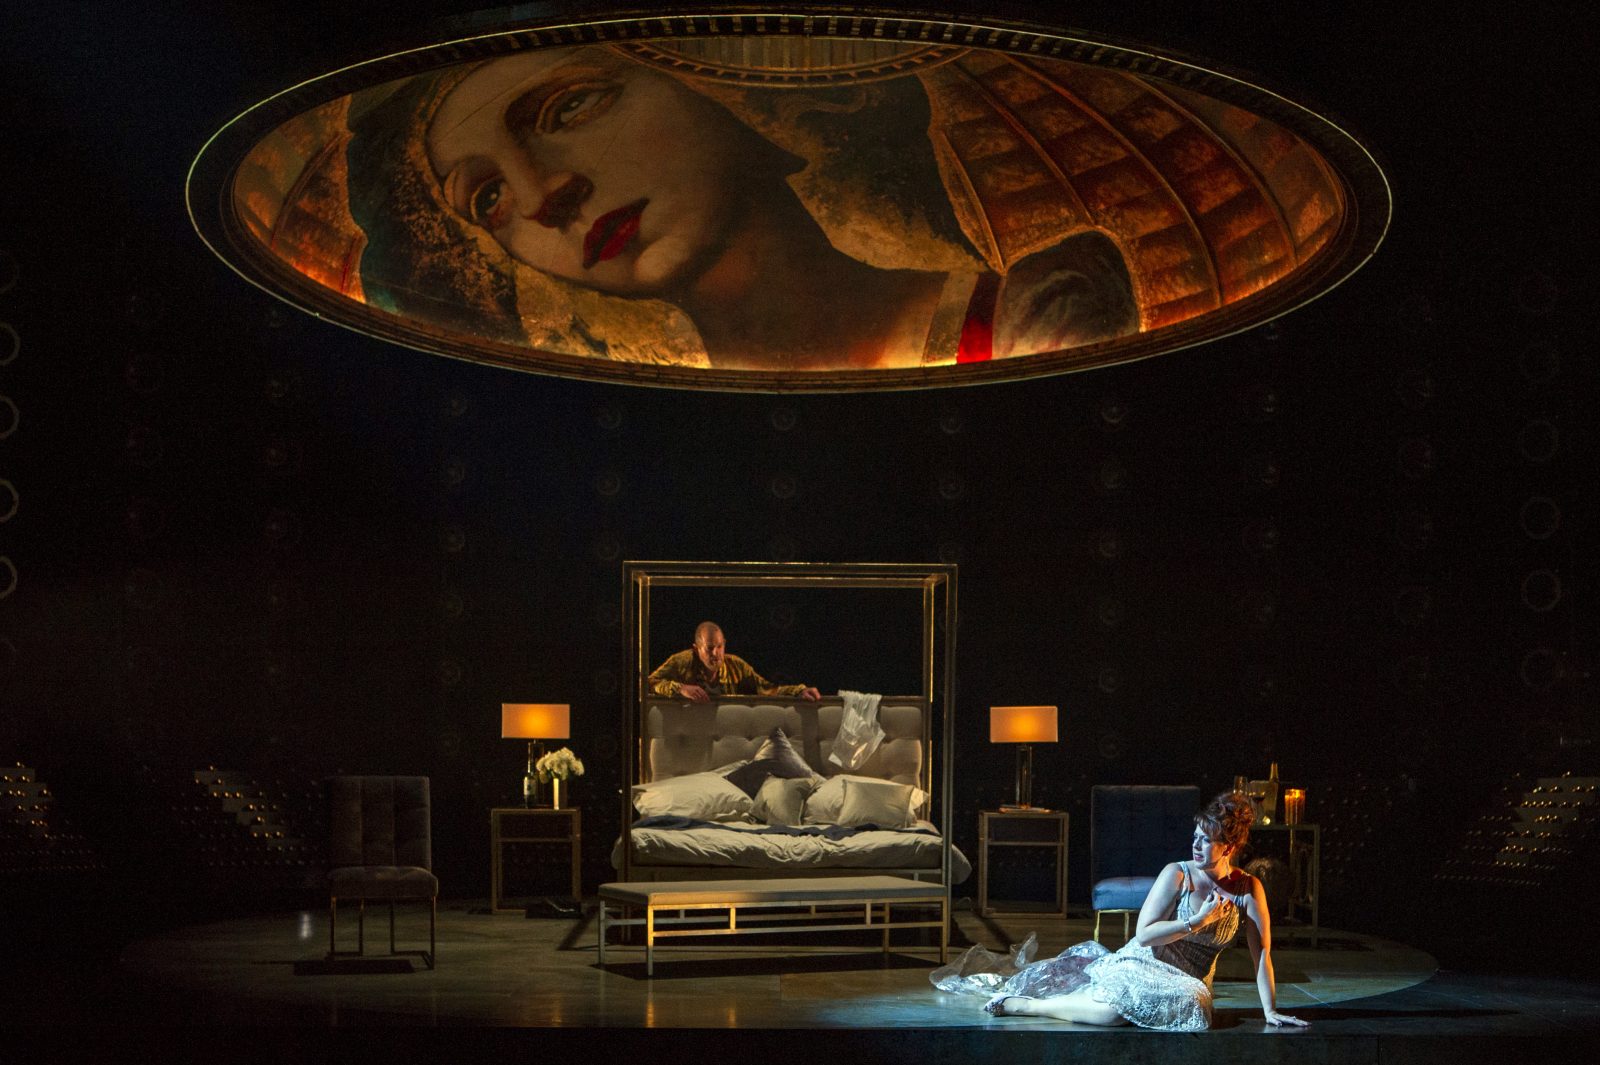 person lay next to a bed, part of the opera performance of Tosca.